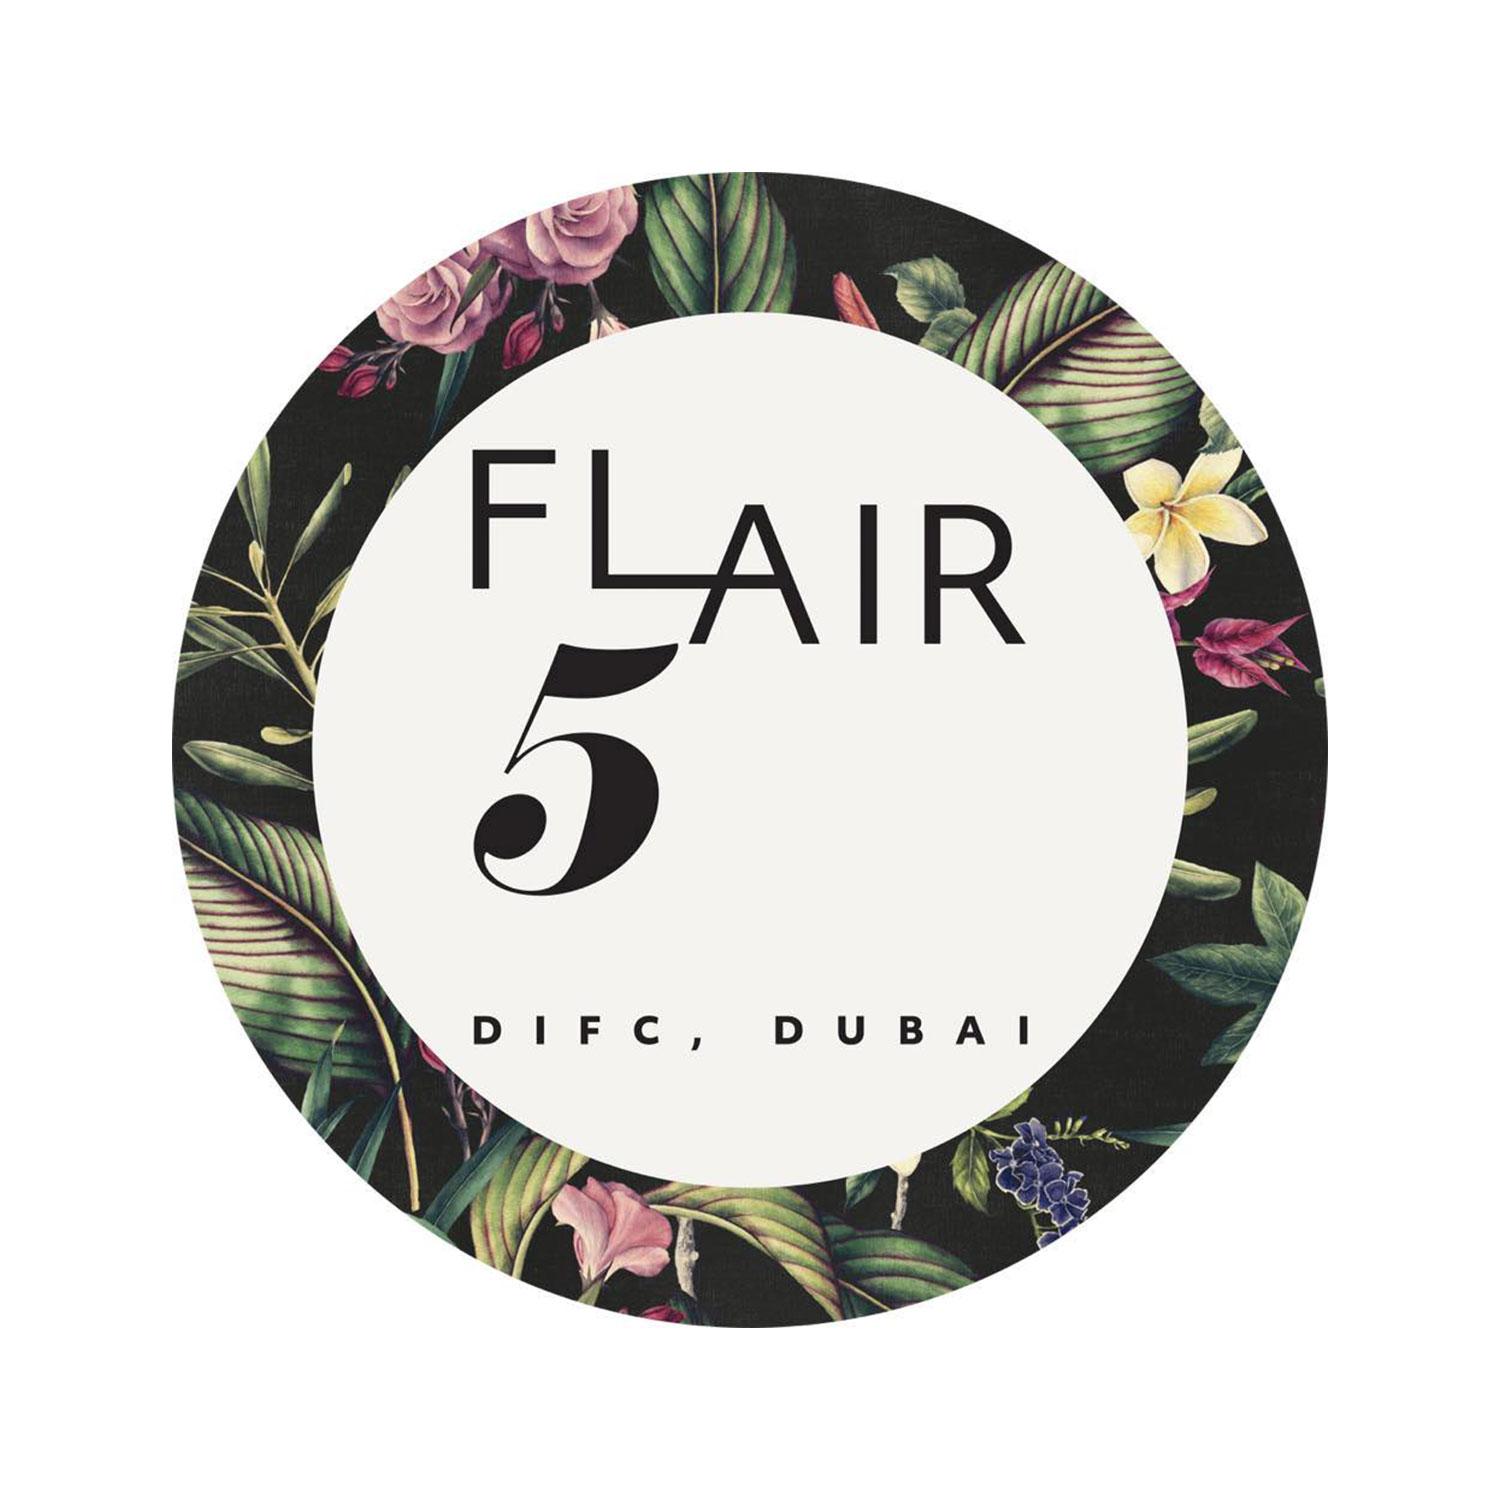 Le Flair Brunch - Every Friday in DIFC